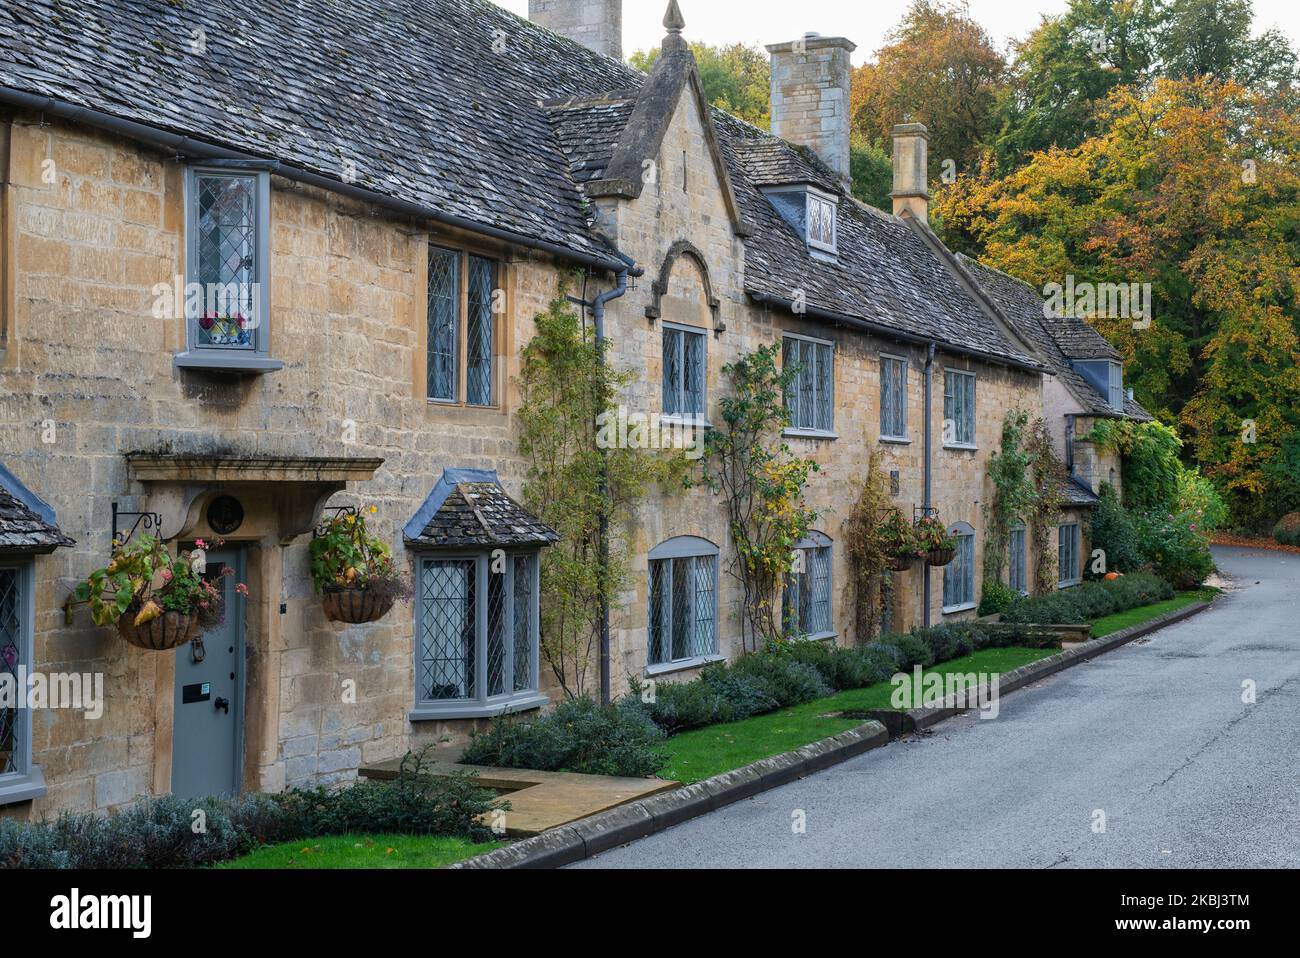 Cotswold stone cottages in autumn. Broad Campden, Cotswolds, Gloucestershire, England Stock Photo